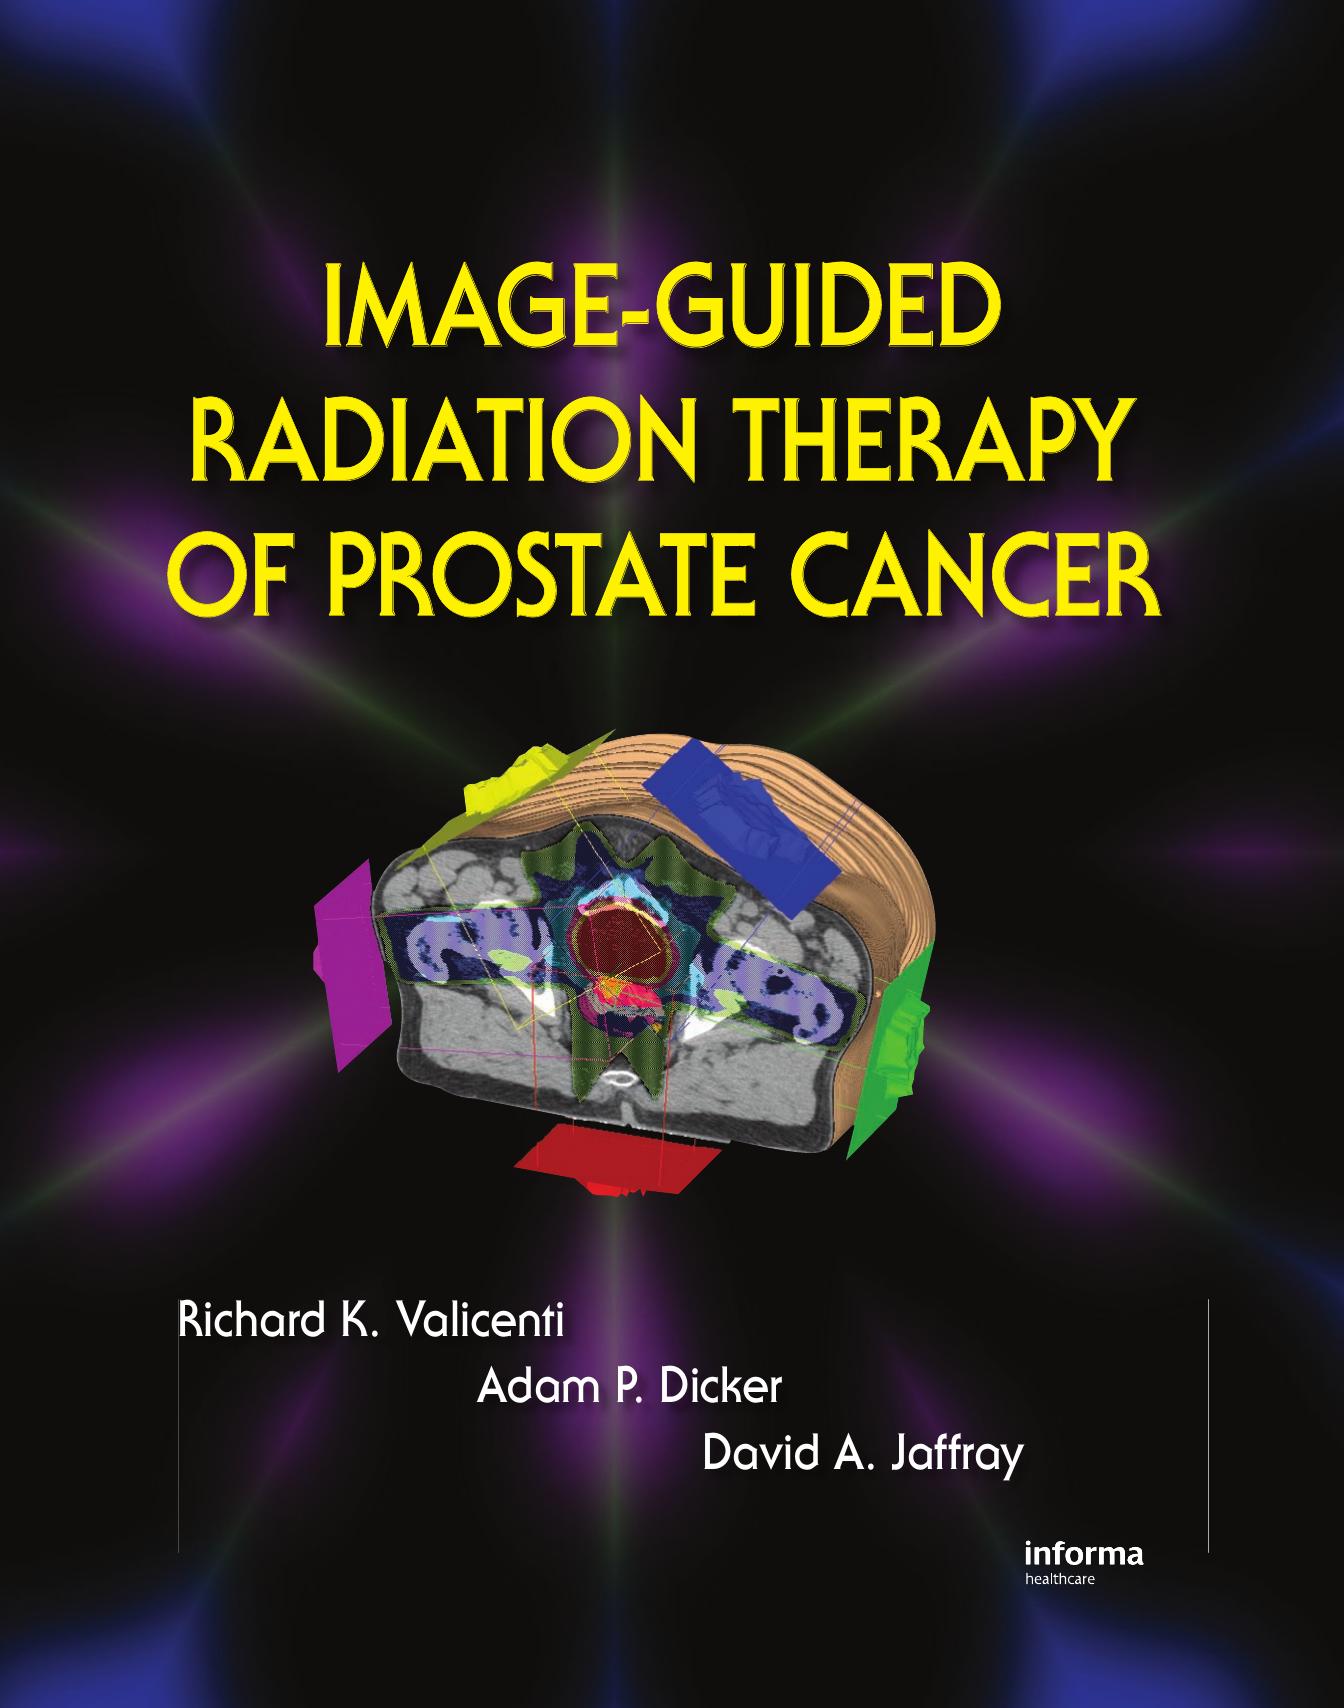 Image-Guided Radiation Therapy of Prostate Cancer.jpg